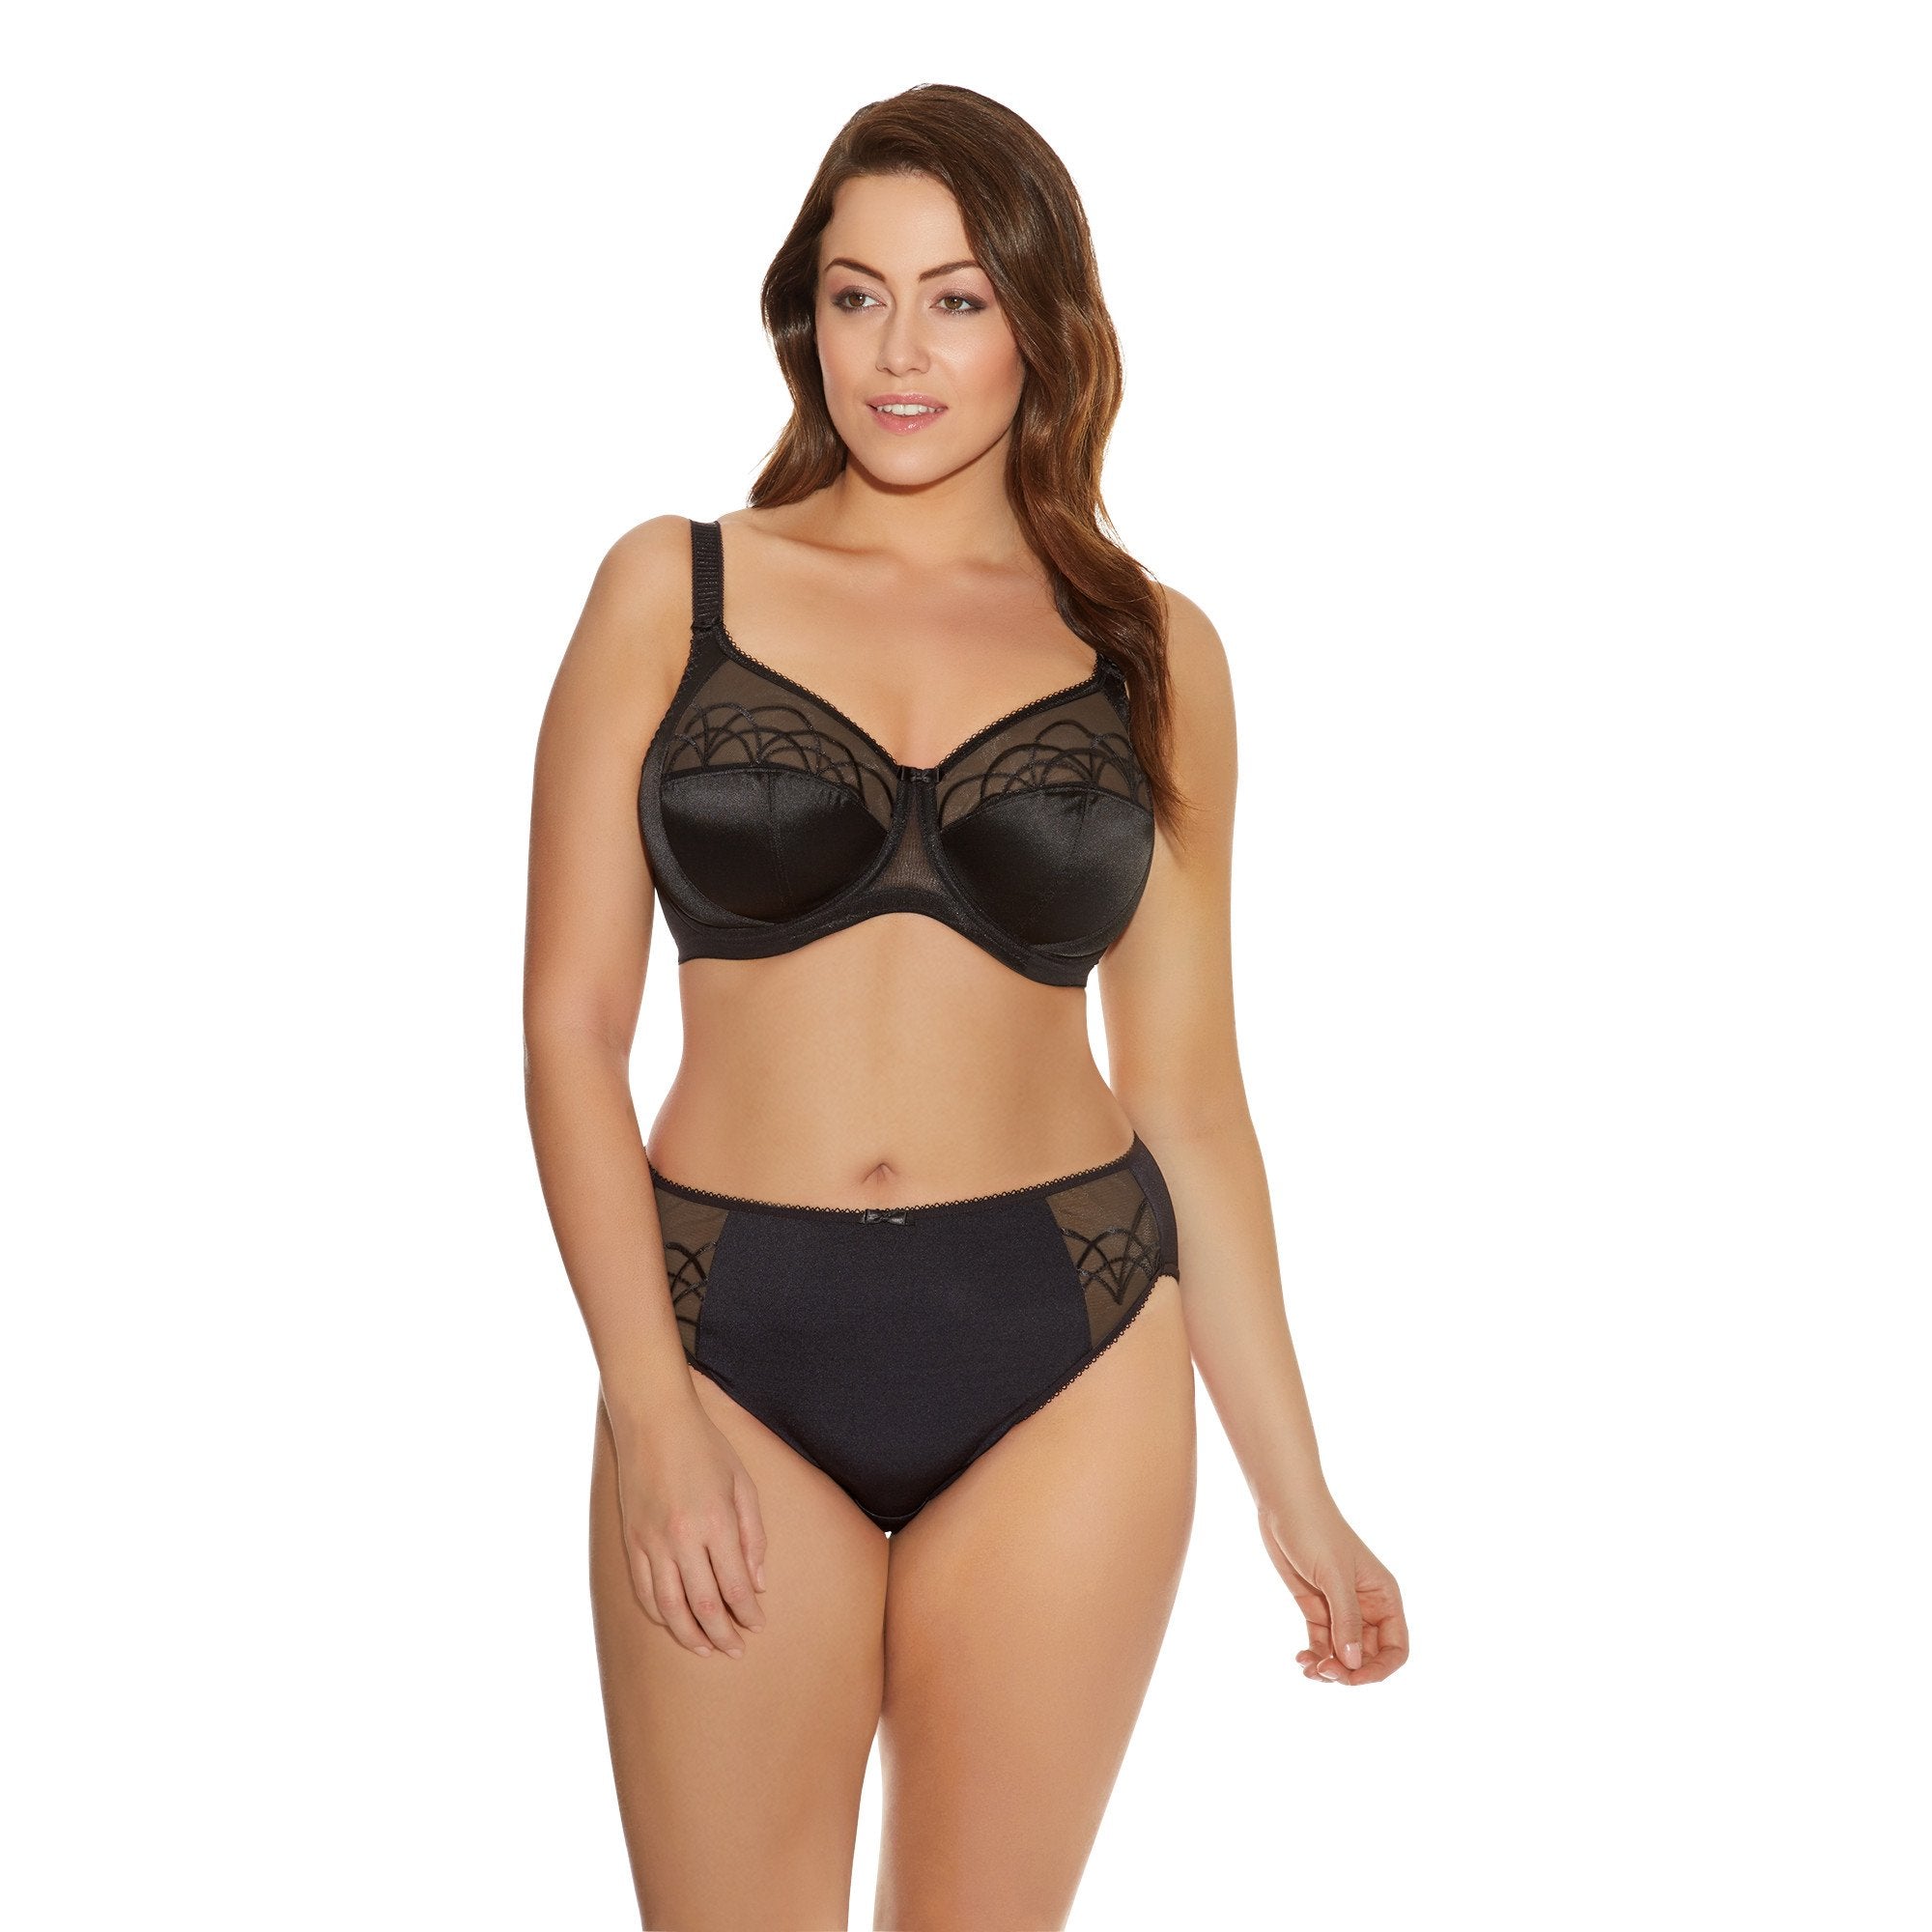 Elomi Cate Full Cup Banded Bra - Black